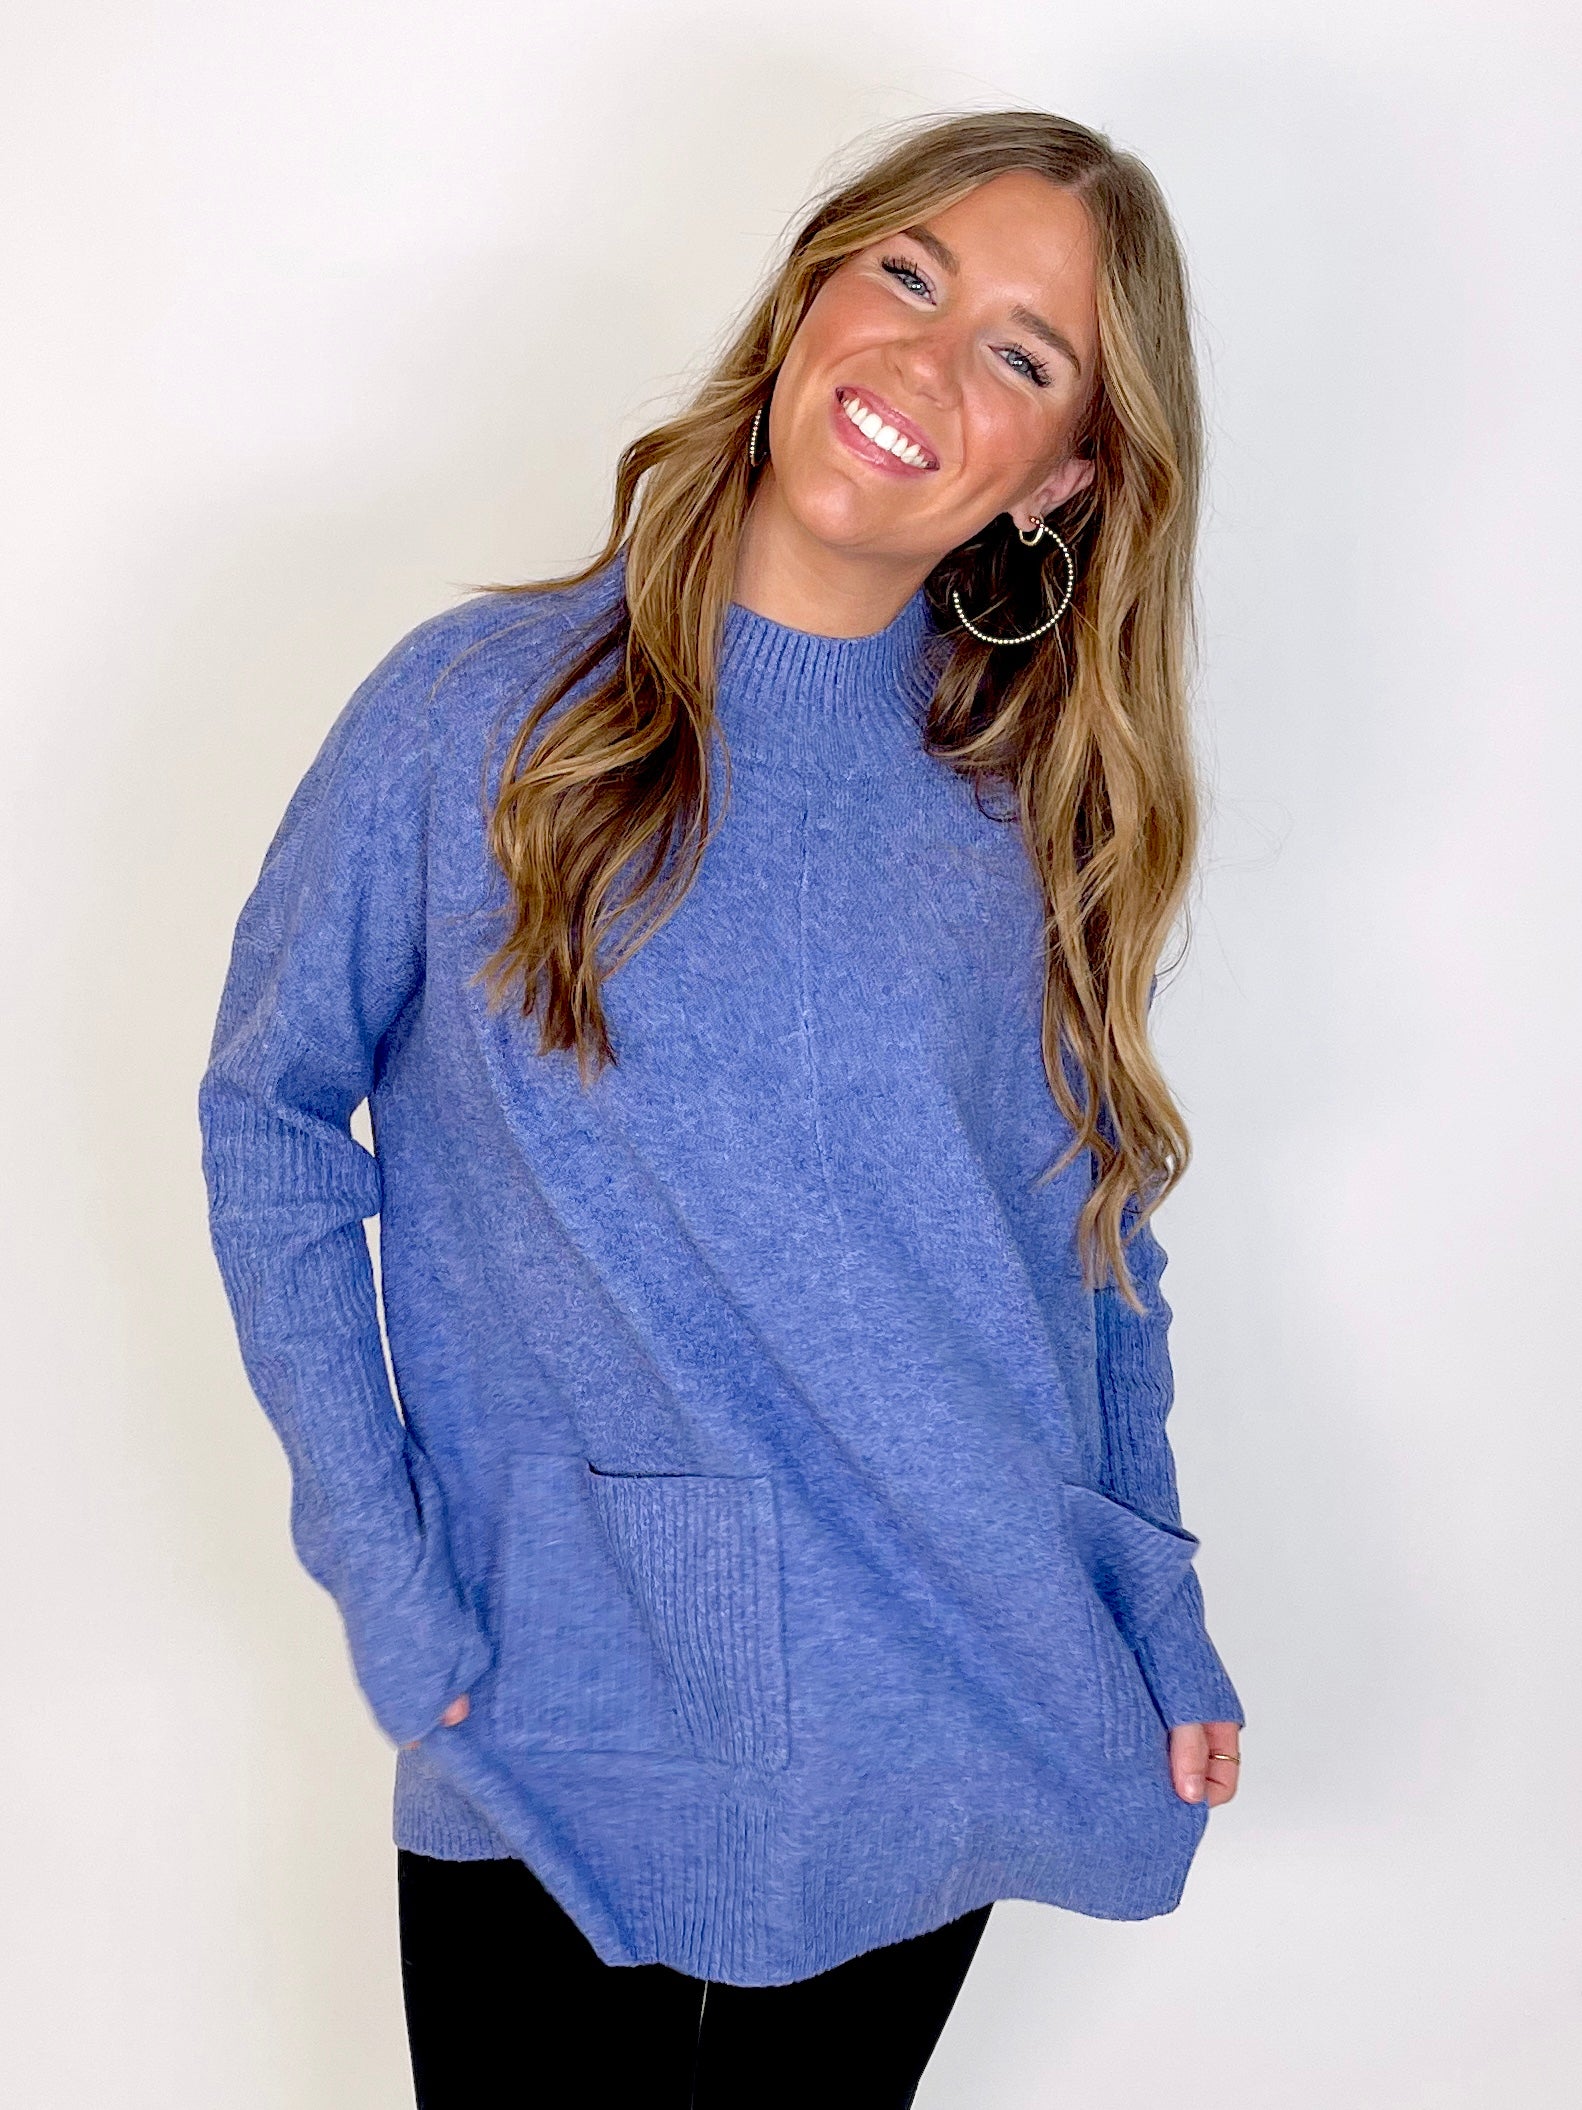 The Kori Sweater-Sweaters-Kori-The Village Shoppe, Women’s Fashion Boutique, Shop Online and In Store - Located in Muscle Shoals, AL.